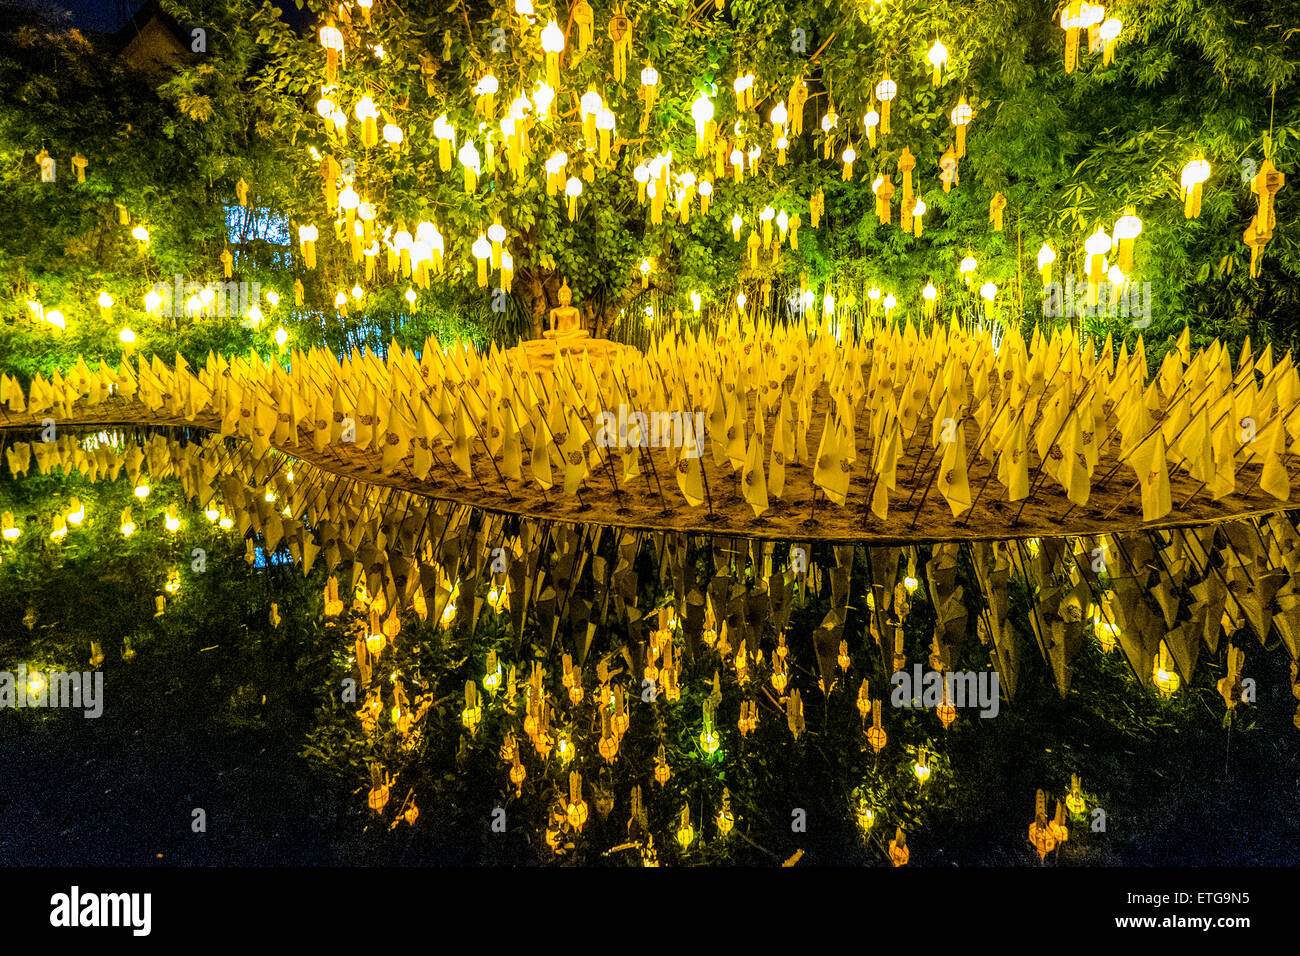 Asia. Thailand, Chiang Mai. Wat Phantao. Preparation for the King's birthday on December 5. Stock Photo